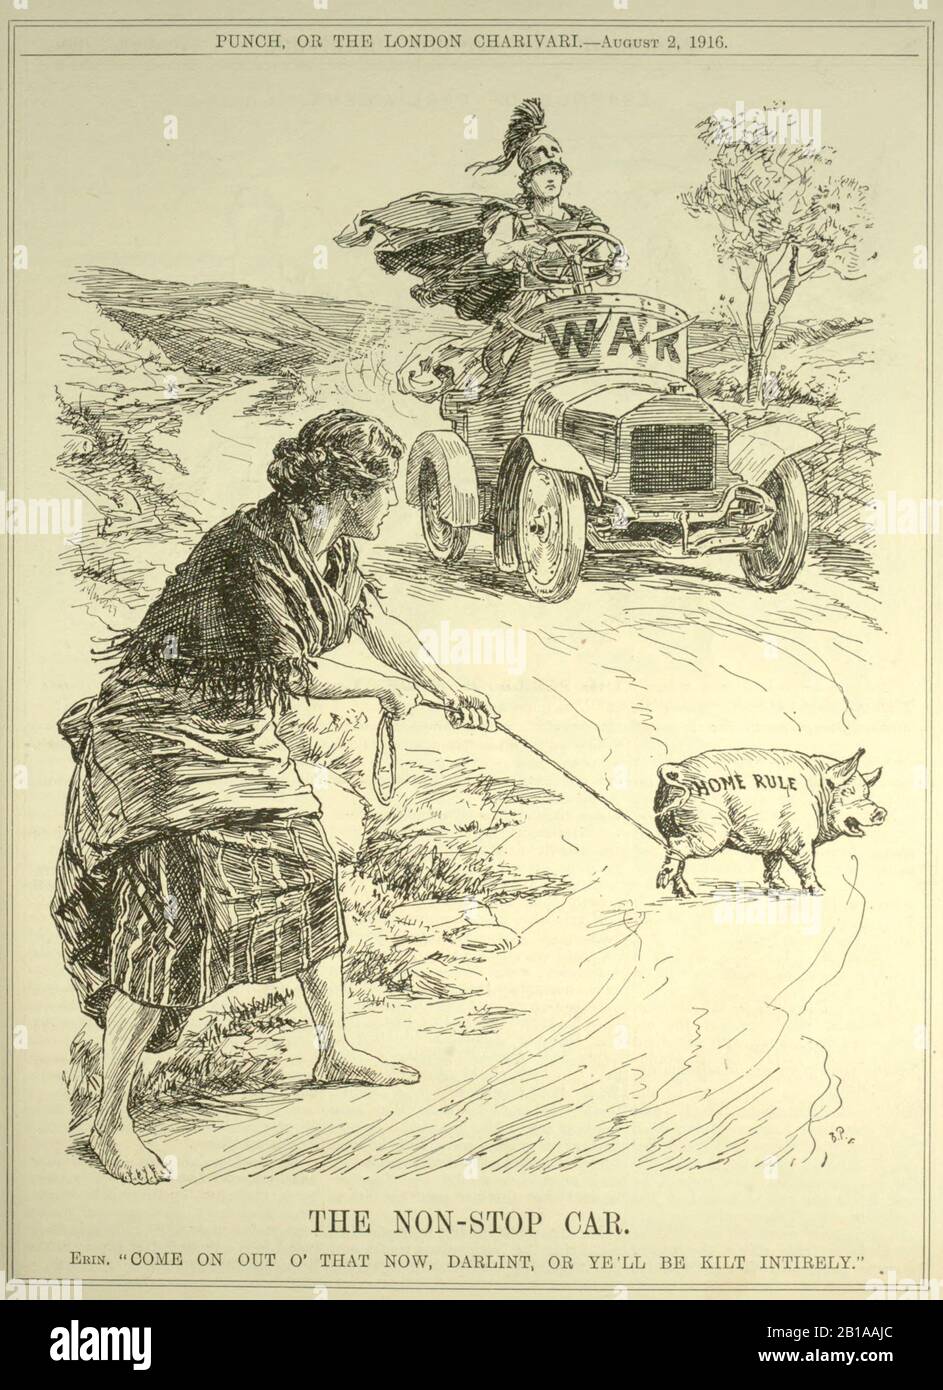 The Non-stop Car. Punch 1916. Bernard Partridge 1861-1945. The cartoon implies that if Irish actions regarding home rule interfered with the first world war then they would be stopped. Stock Photo